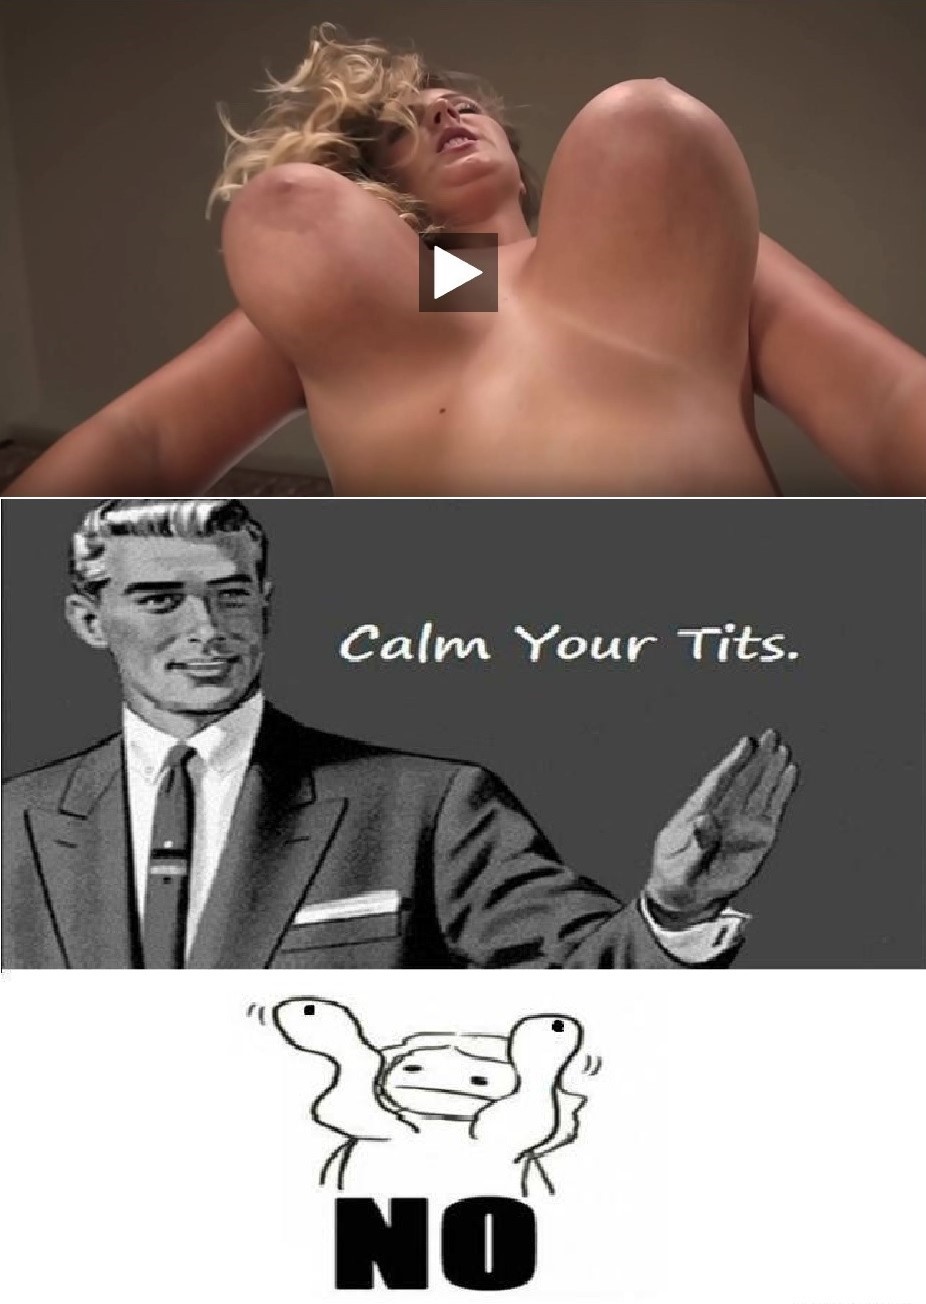 Live-Action Calm Your Tits Meme - Image Chest - Free Image Hosting